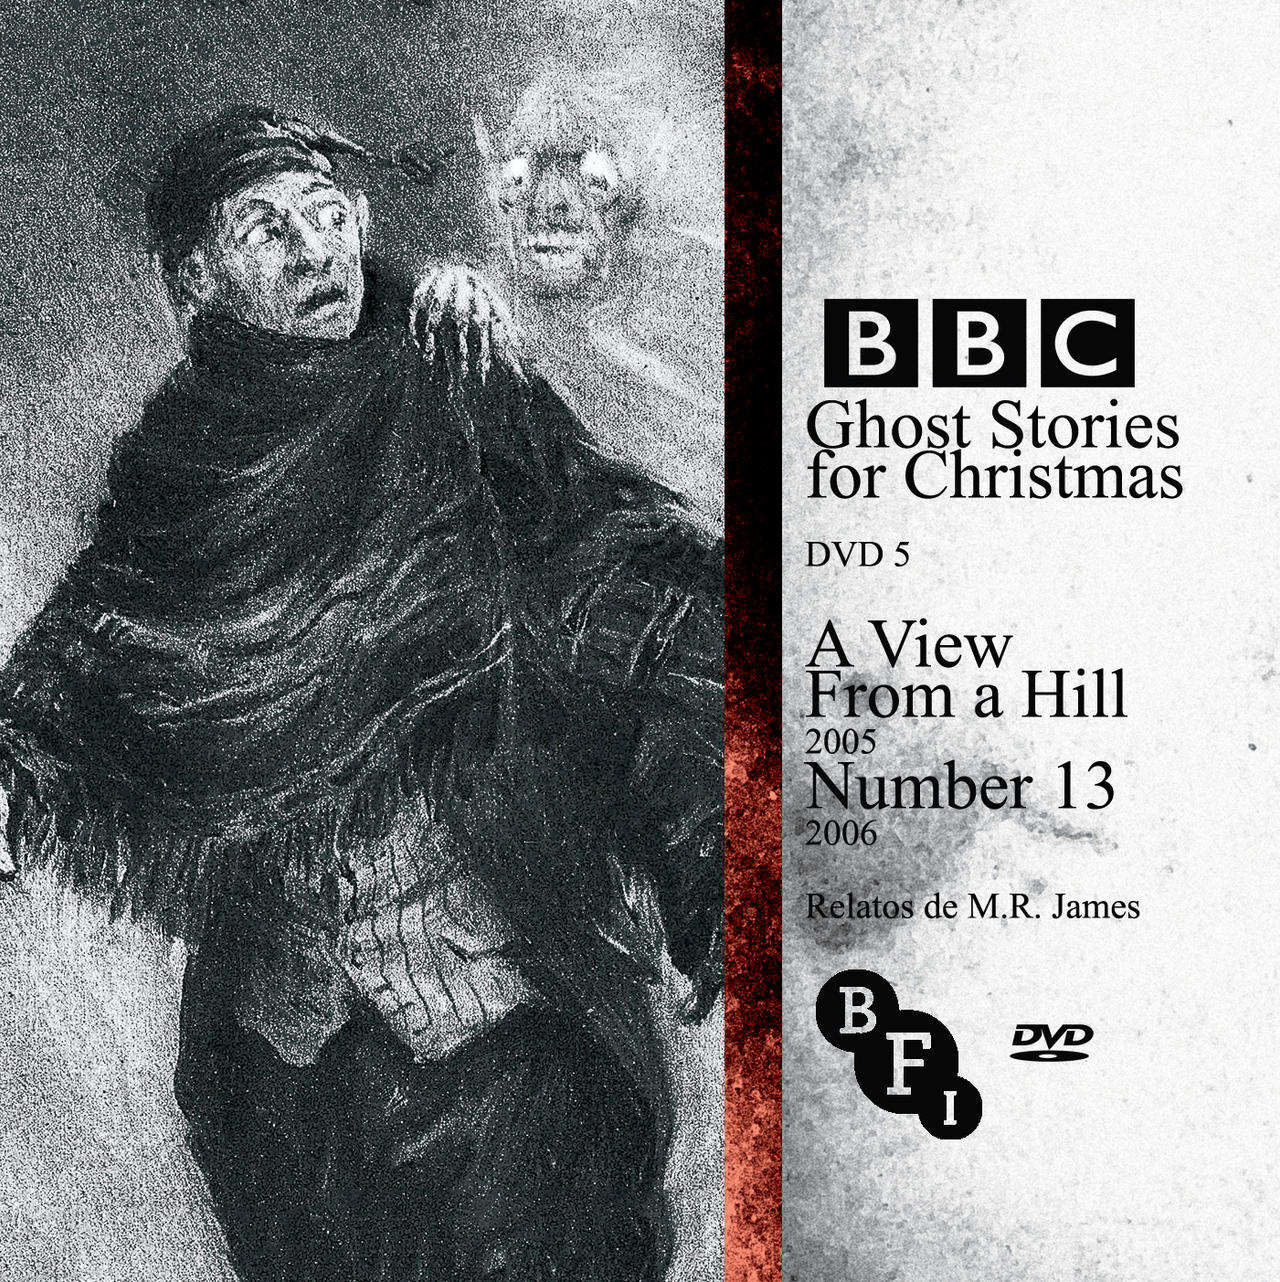 Meting . impliceren BBC Ghost Stories for Christmas DVD 5 by repopo on DeviantArt